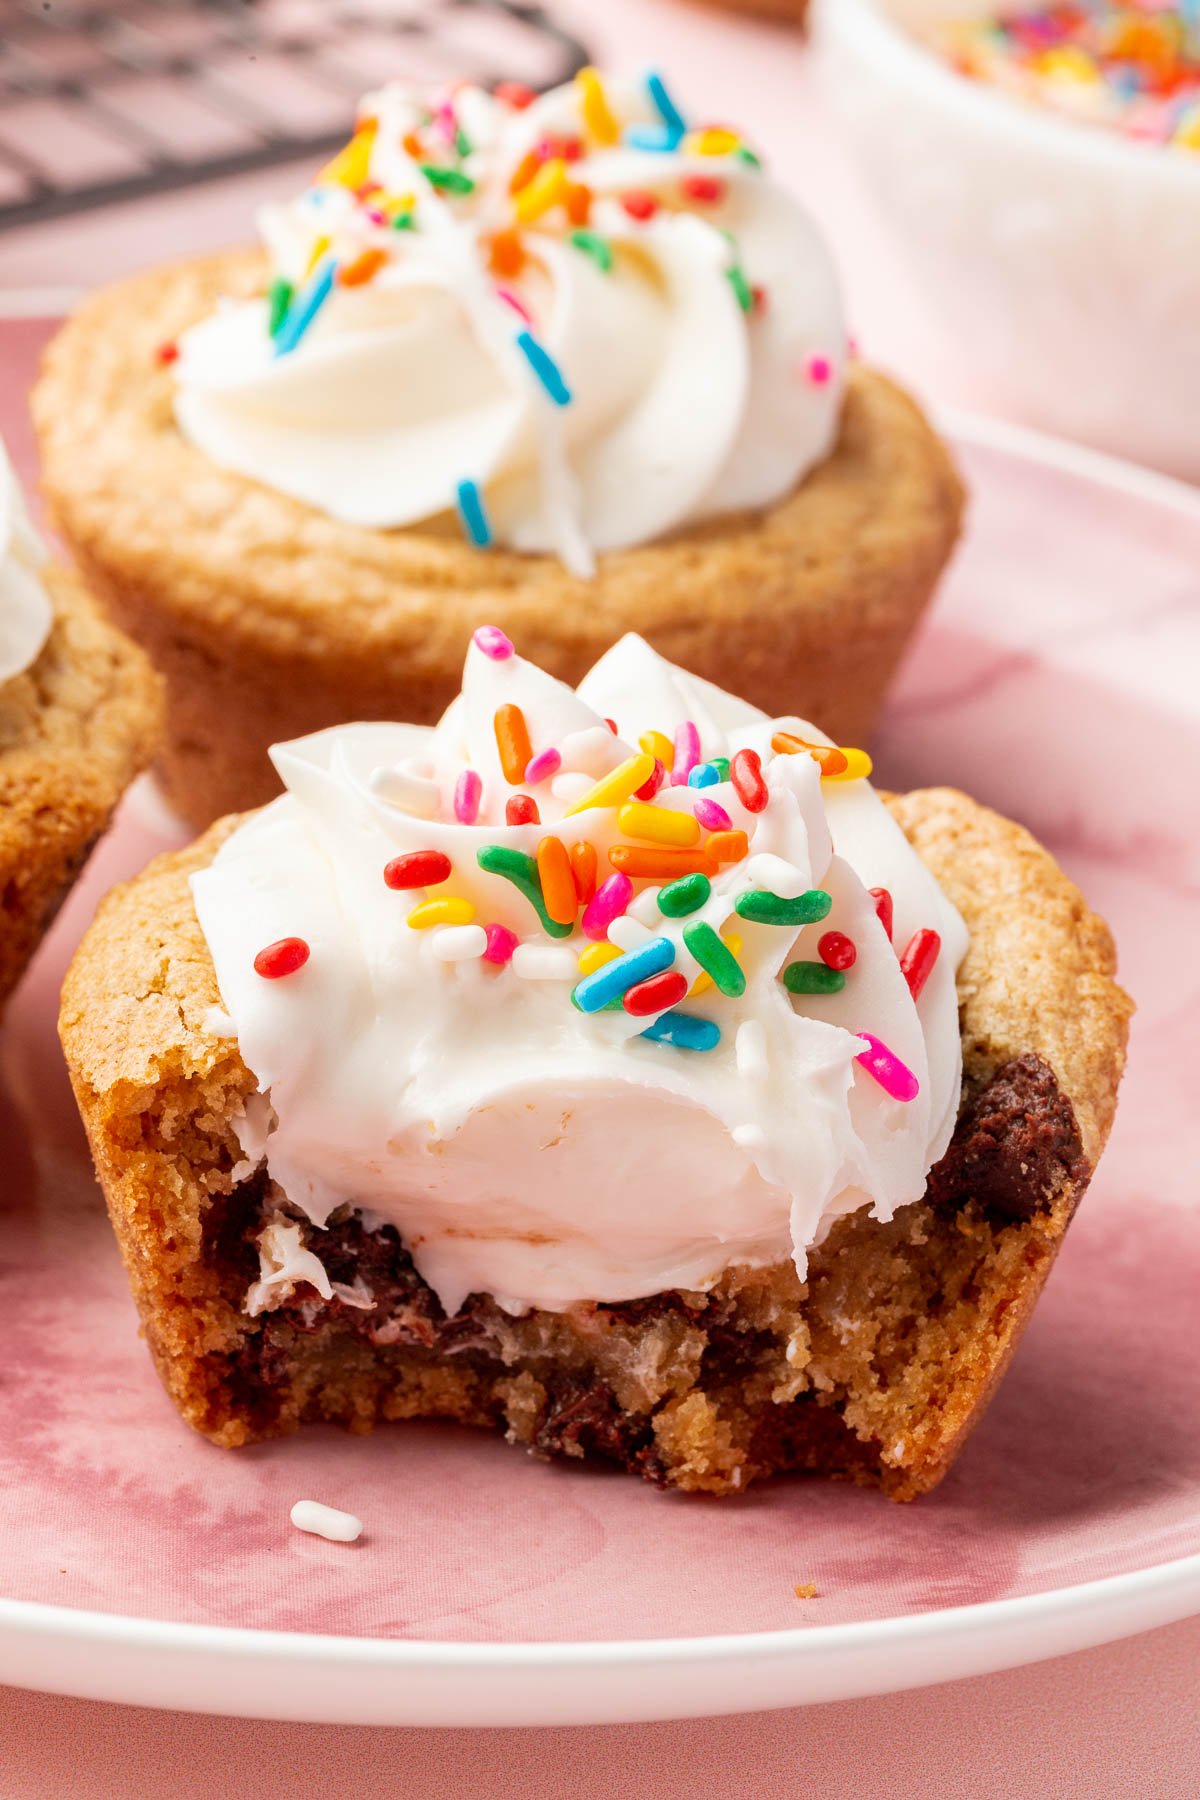 A chocolate chip cookie cup filled with vanilla frosting and topped with rainbow sprinkles that has a bite taken out of it.